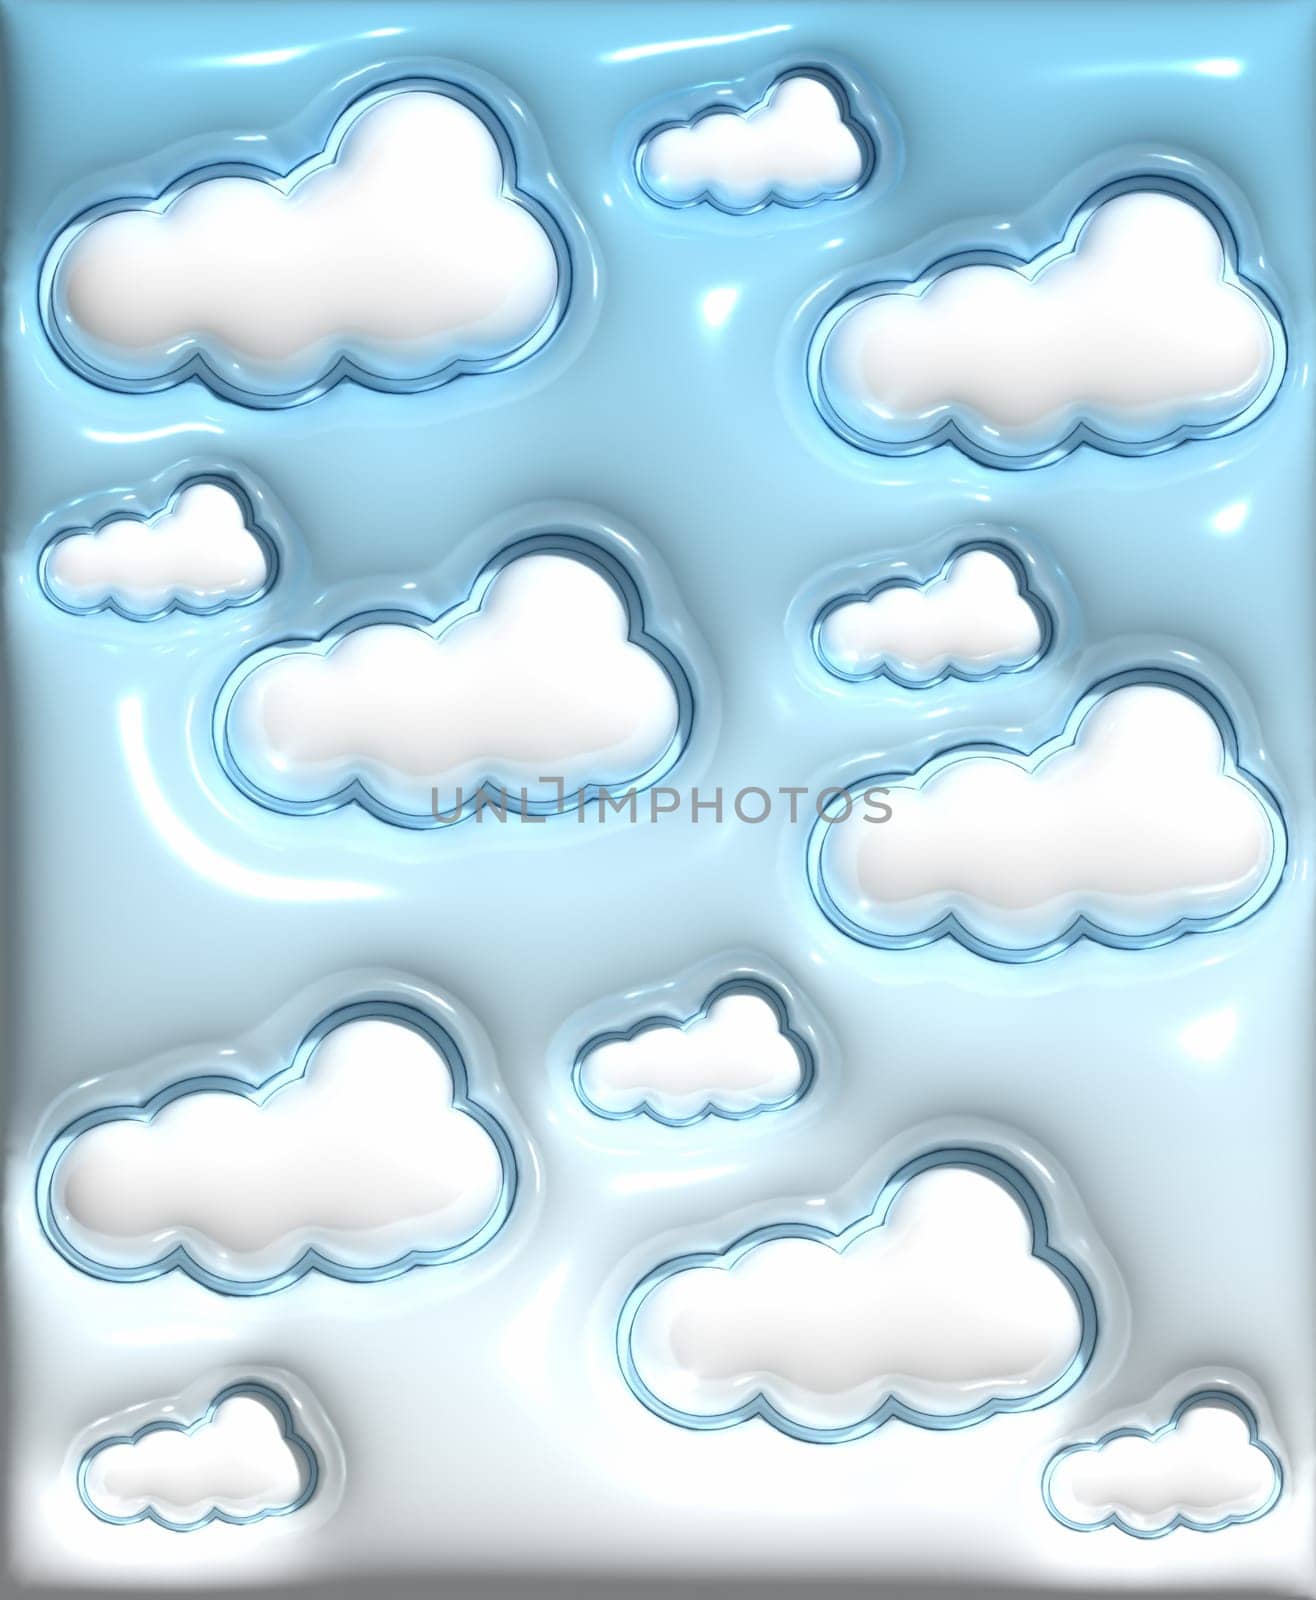 White clouds on a blue background, 3D rendering illustration